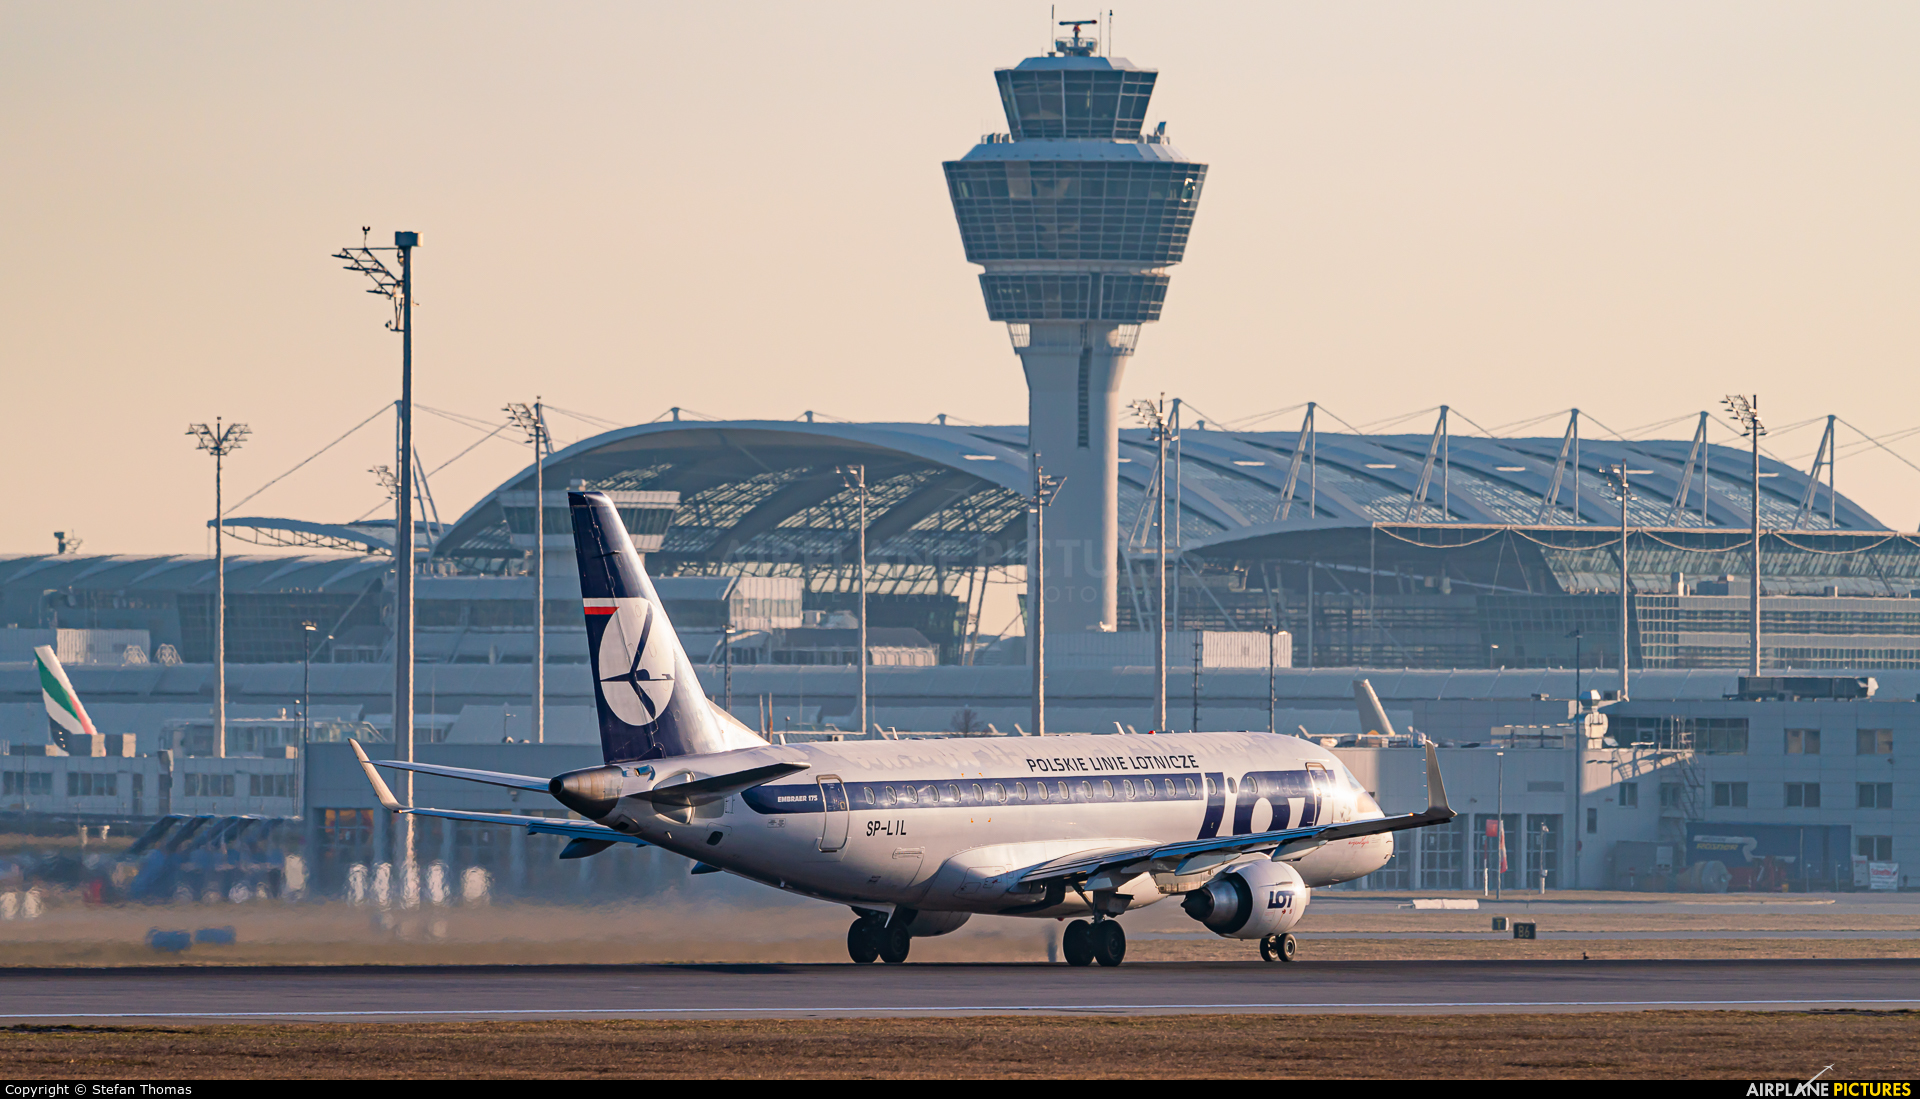 LOT - Polish Airlines SP-LIL aircraft at Munich